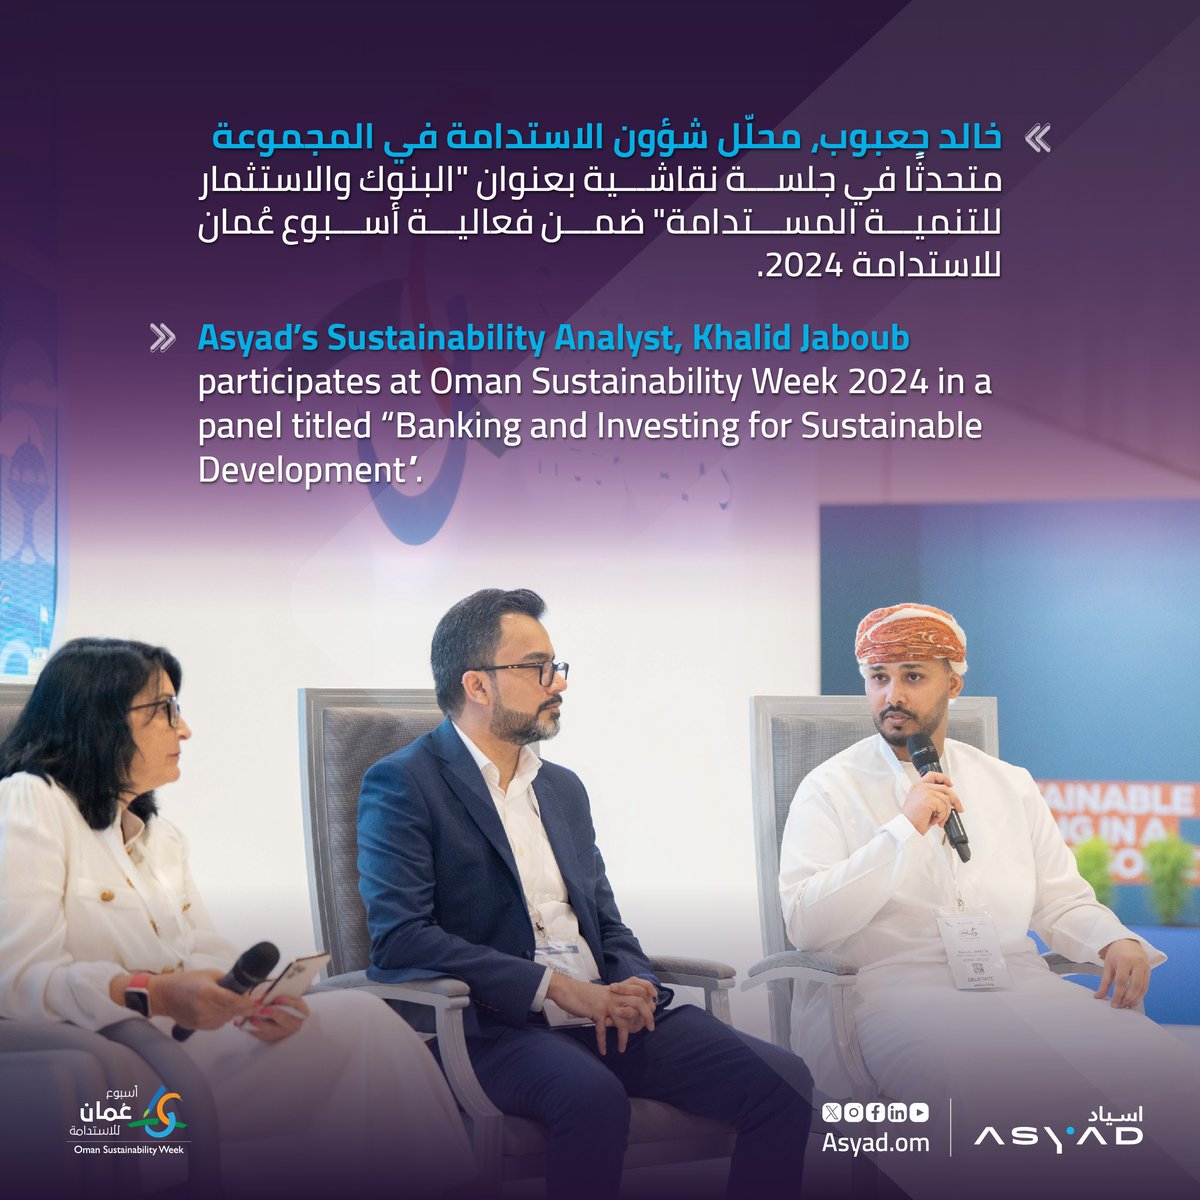 More insights on green financing from #ASYADGroup at #OSW24 in a panel titled “Banking and Investing for Sustainable Development”. Asyad’s Sustainability Analyst, Khalid Jaboub, discussed the role of banks, regulatory frameworks, and green hydrogen logistics, highlighting the